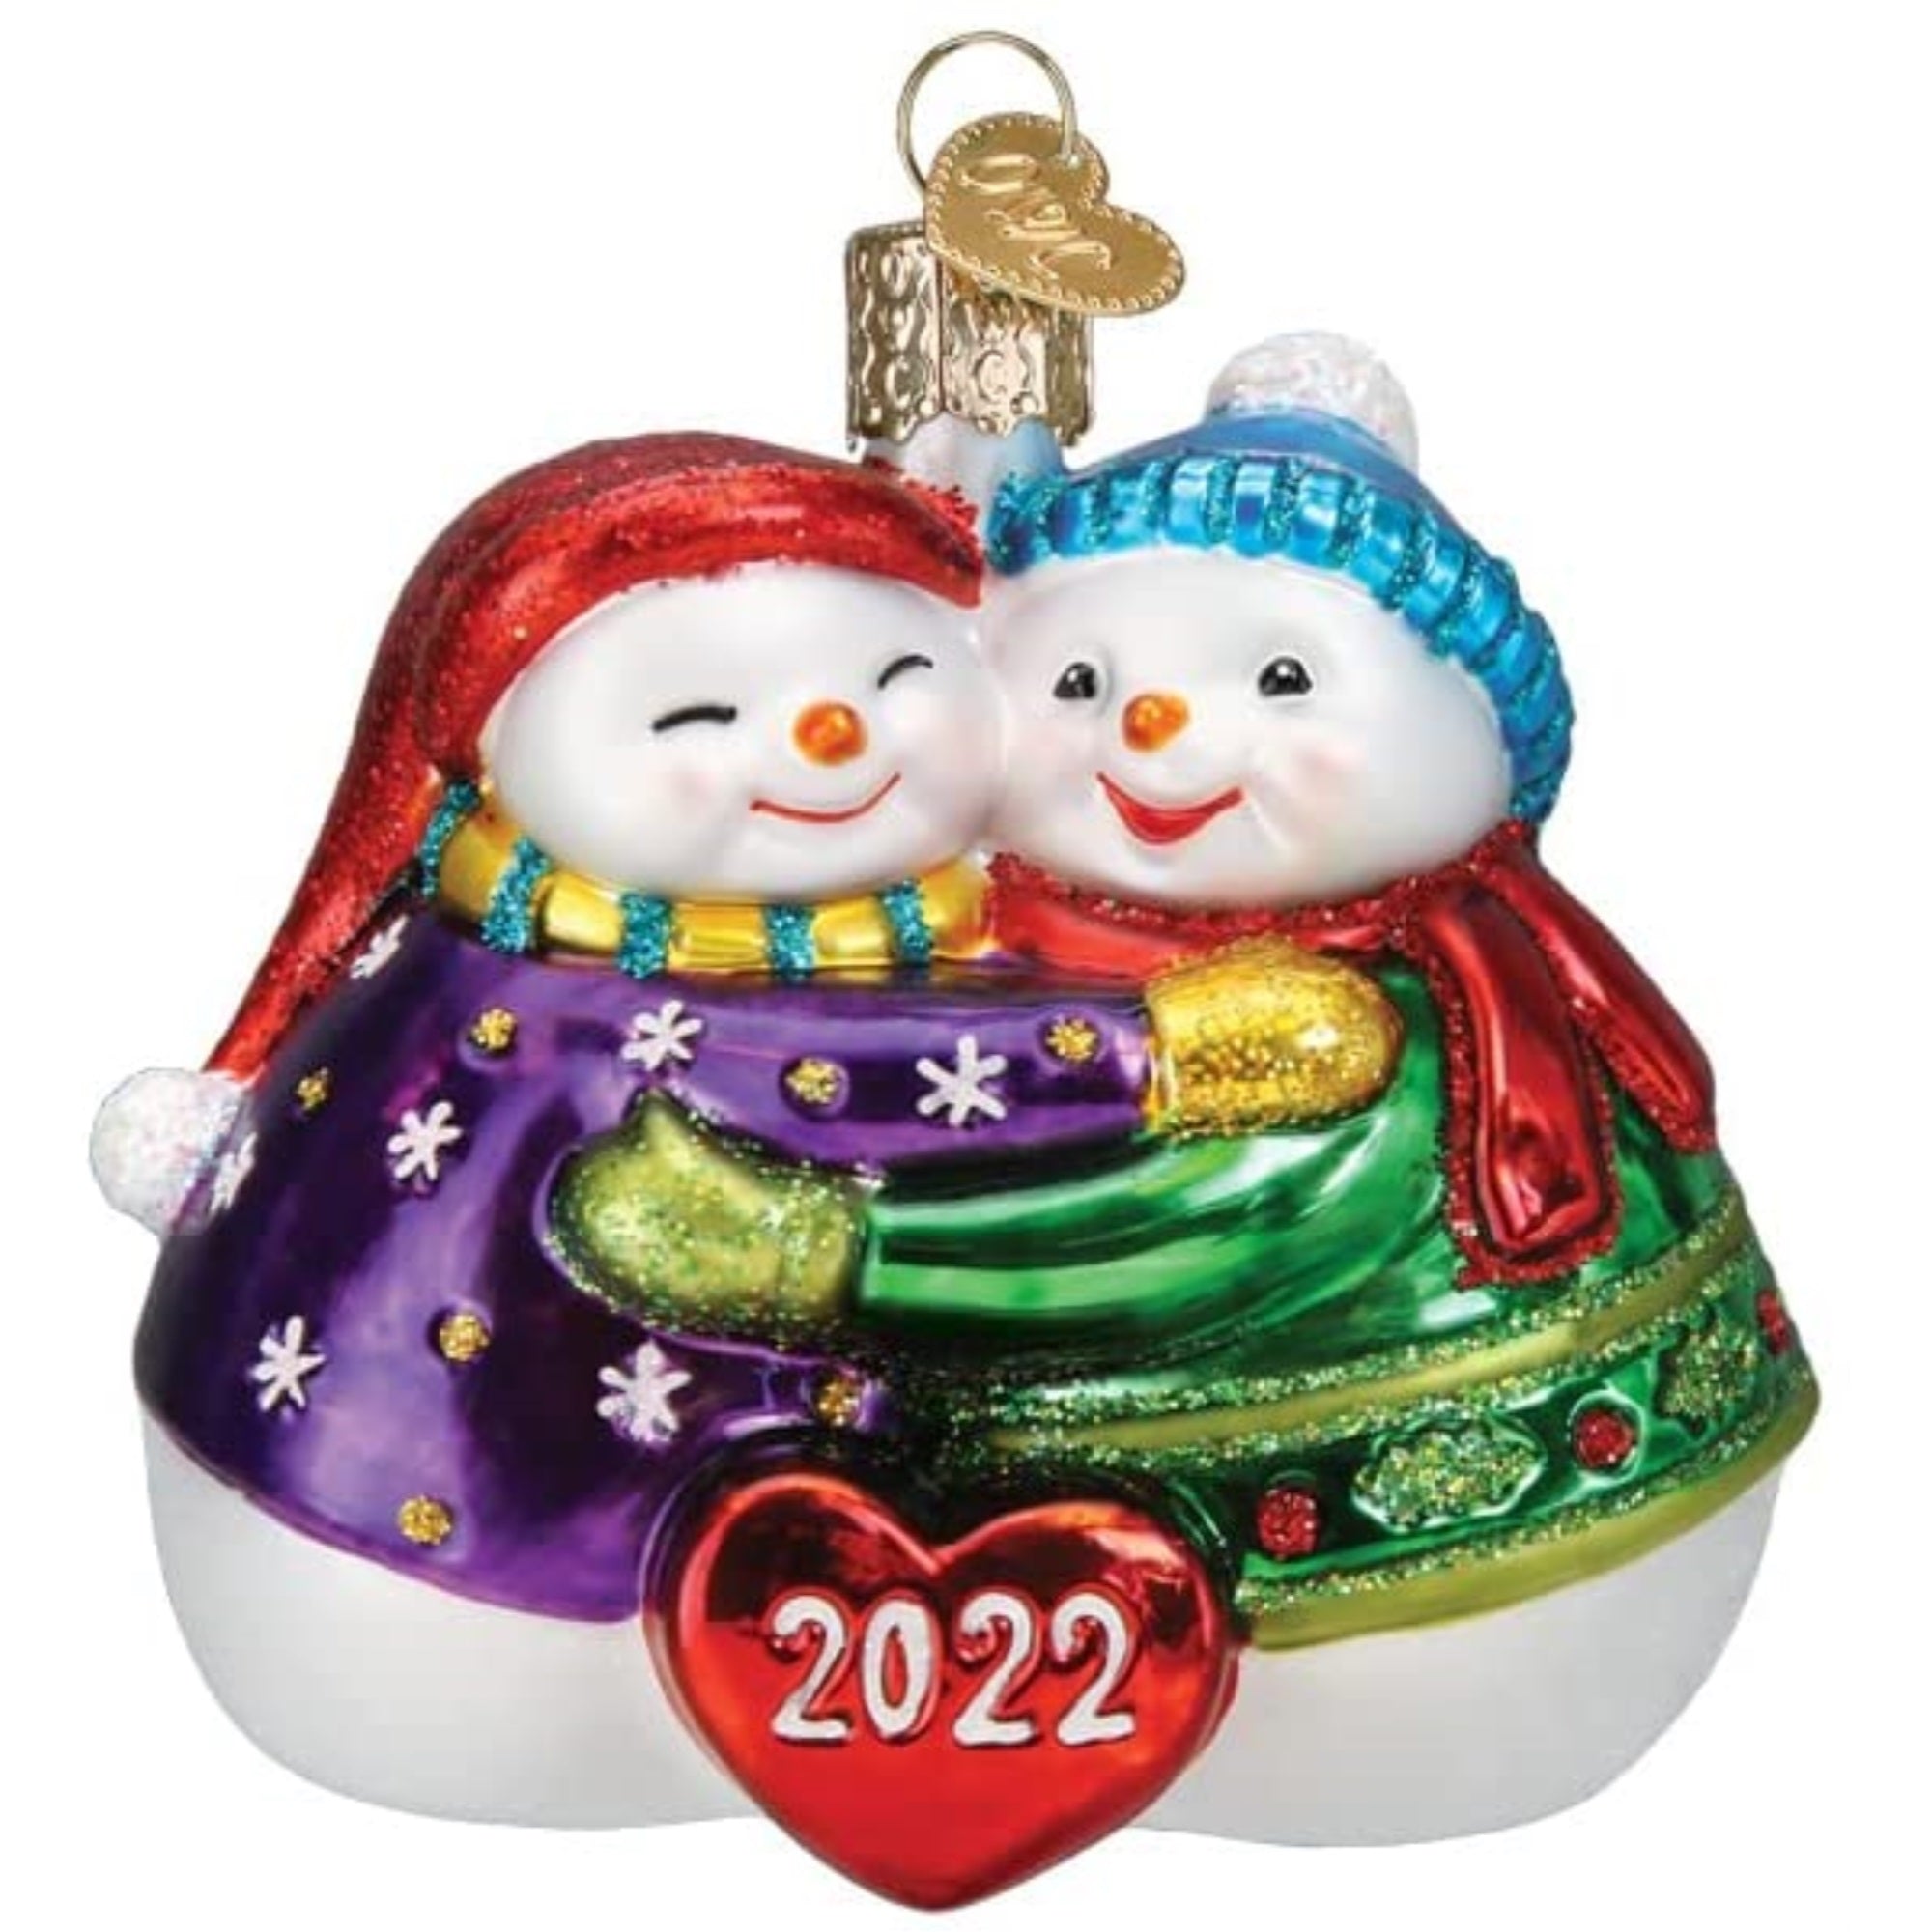 Old World Christmas 2022 Together Again Glass Blown Ornament, Christmas Tree